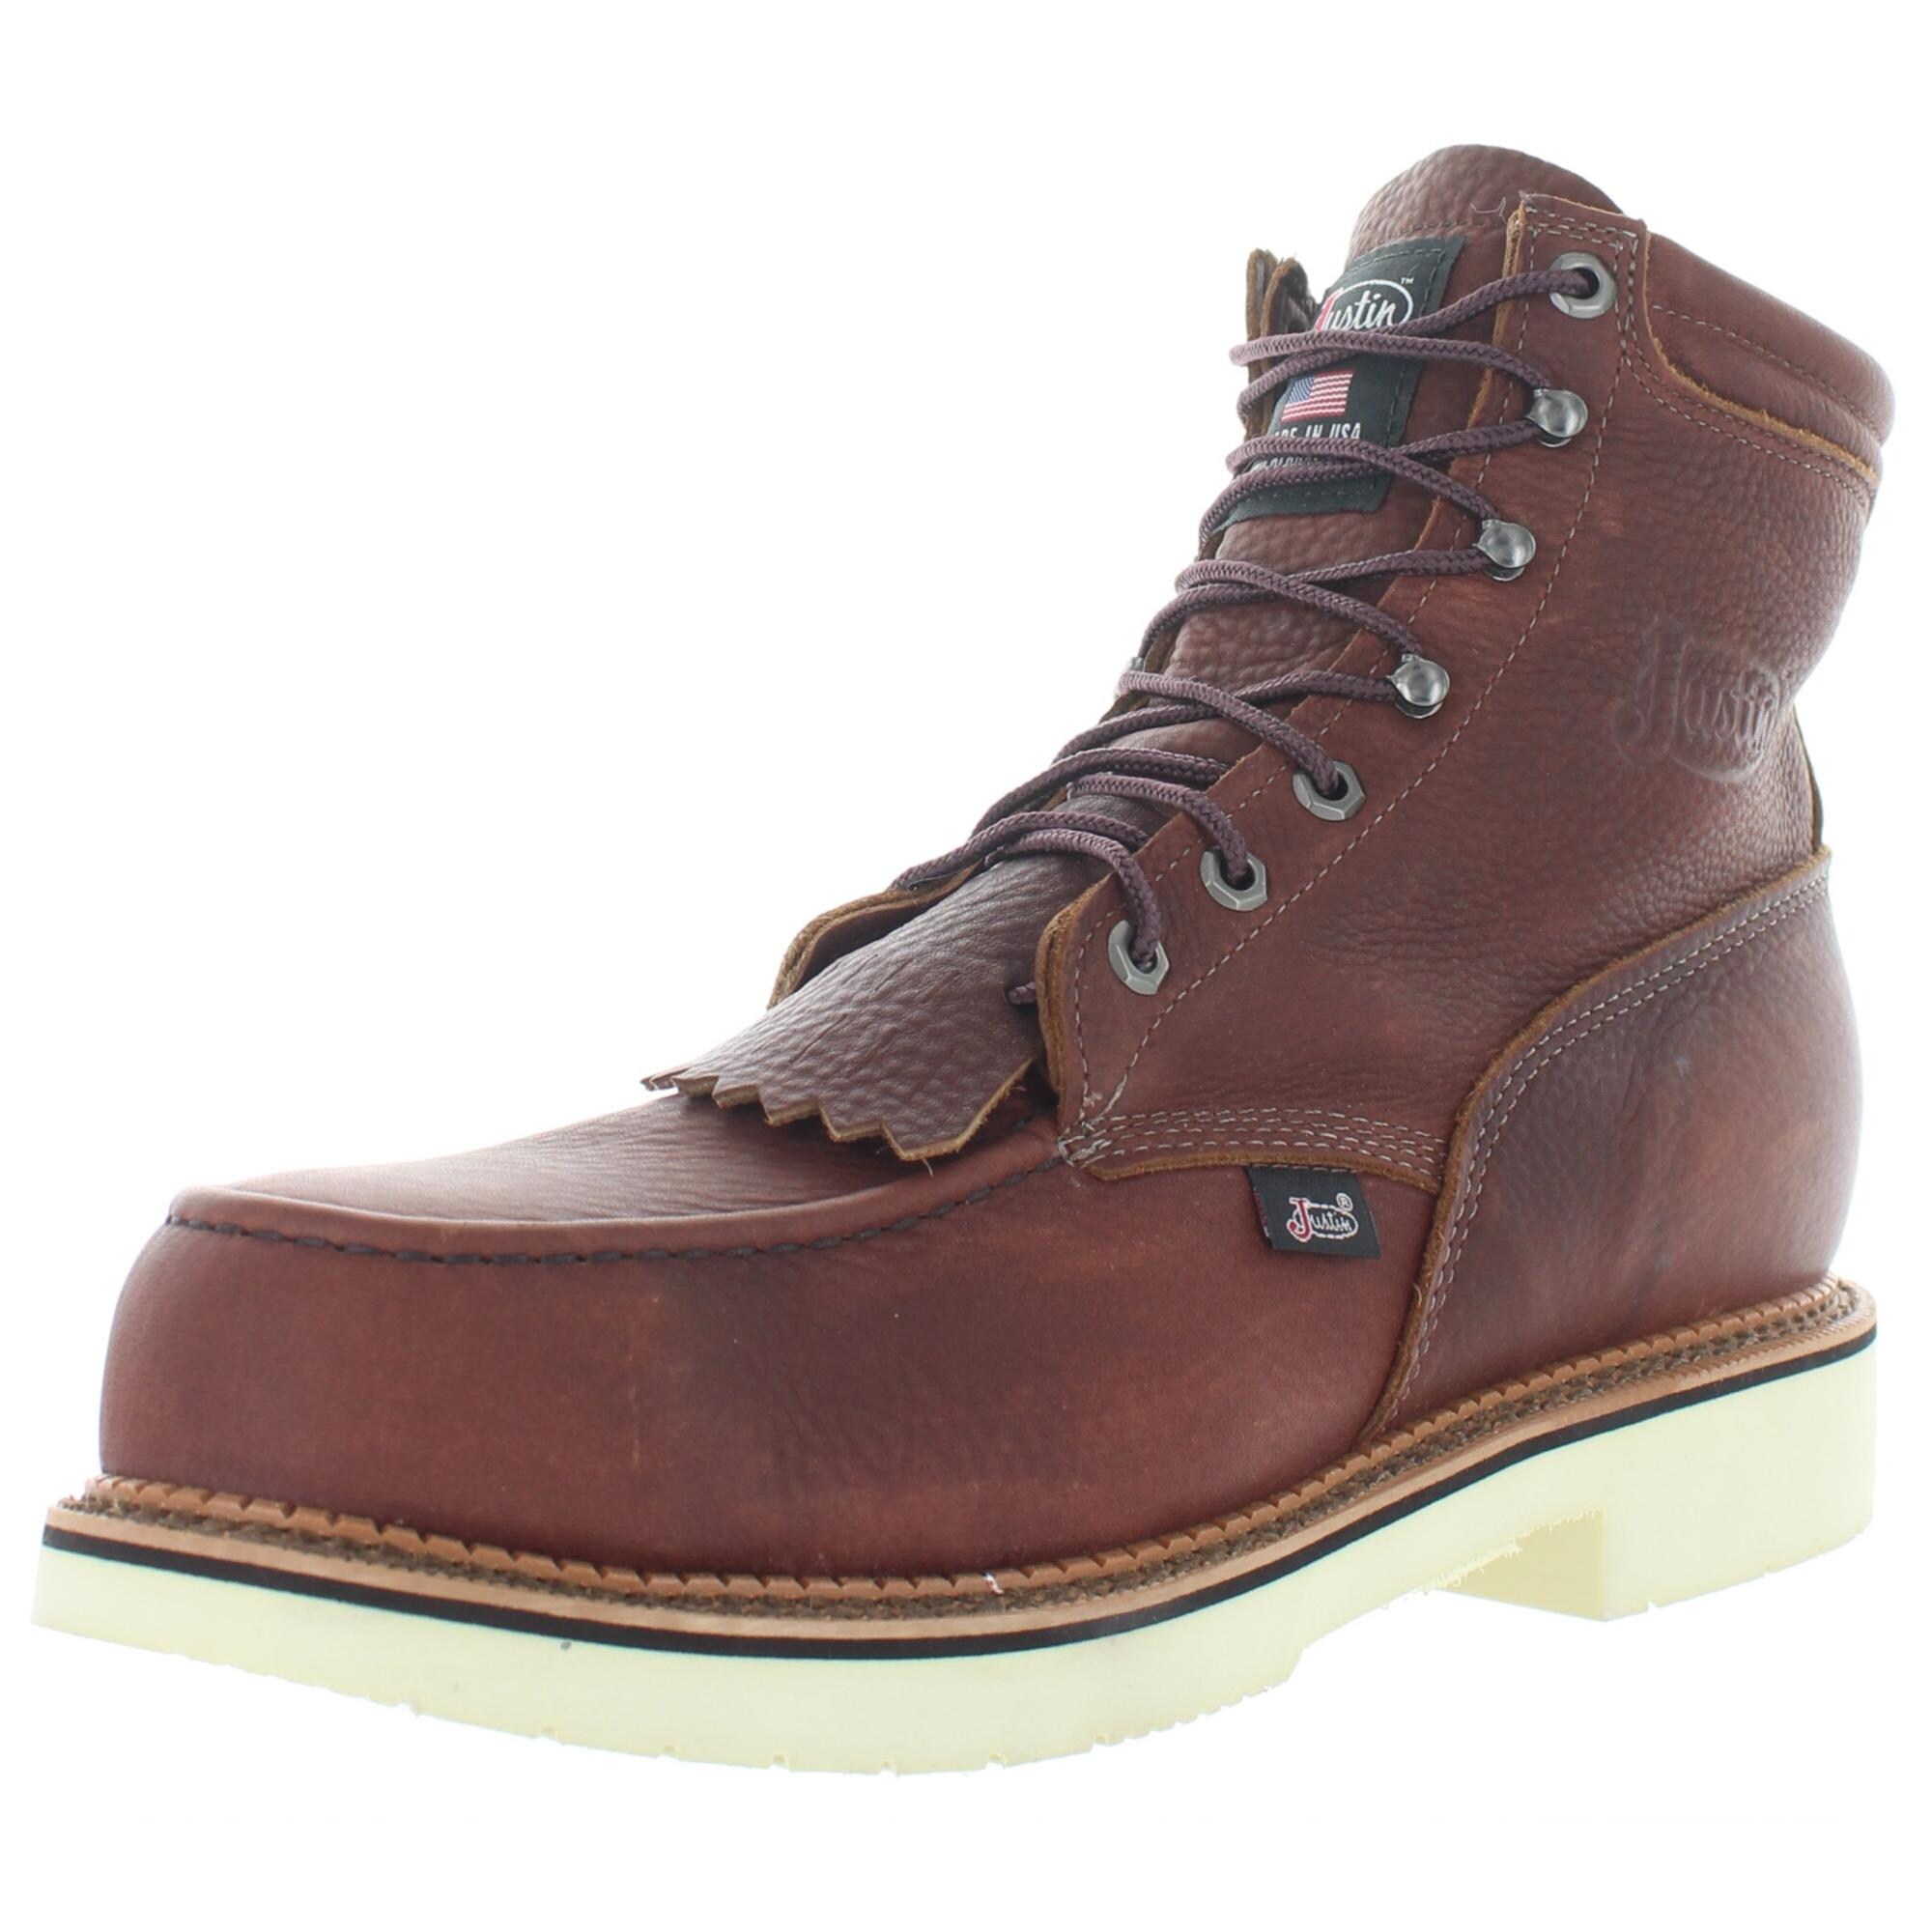 Justin Mens Pitstop Work Boots Leather 